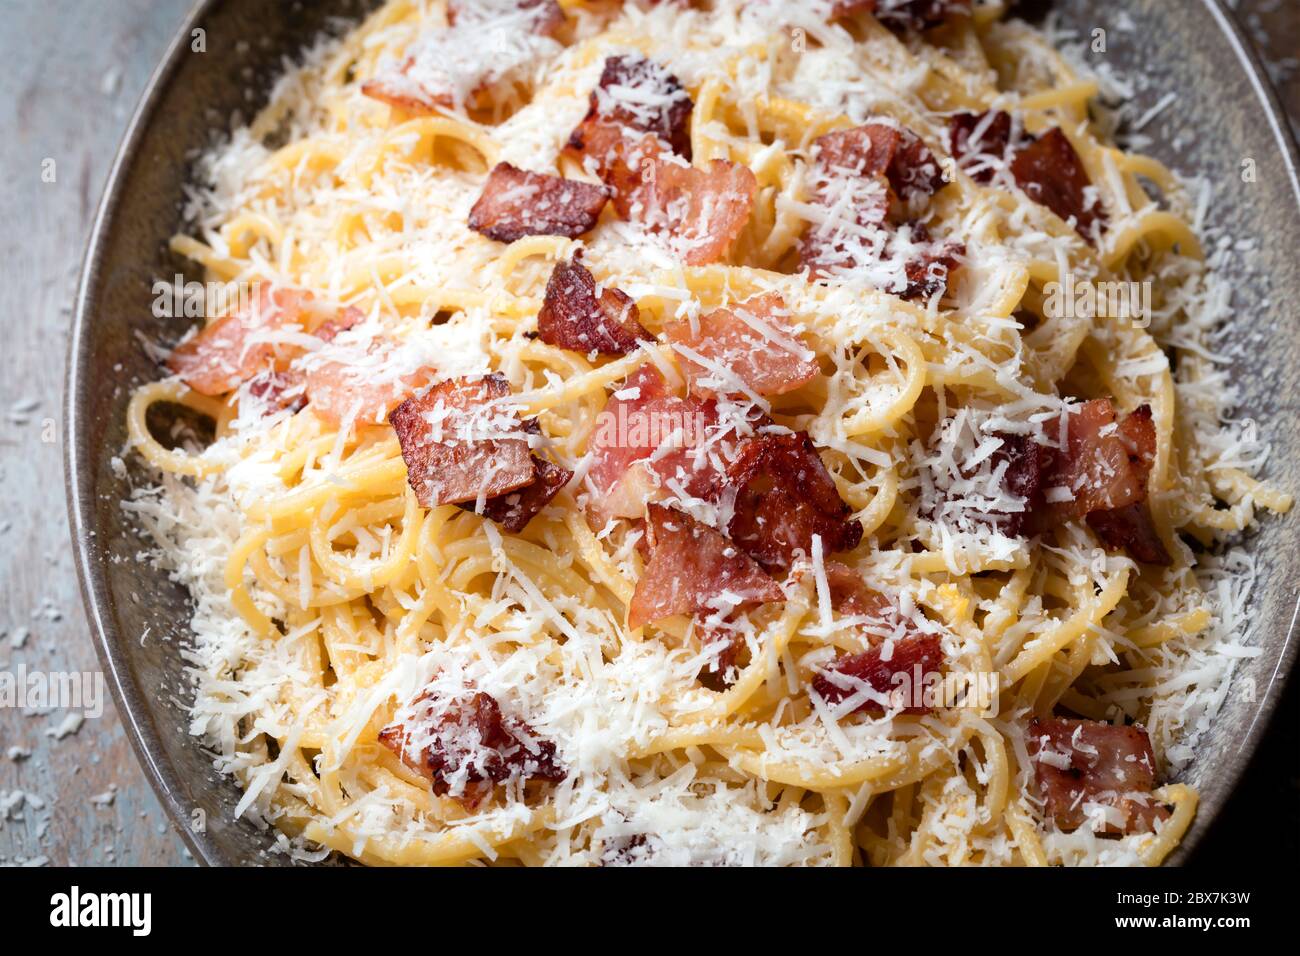 Spaghetti carbonara, top view, in oval dish on rustic timber table. Stock Photo